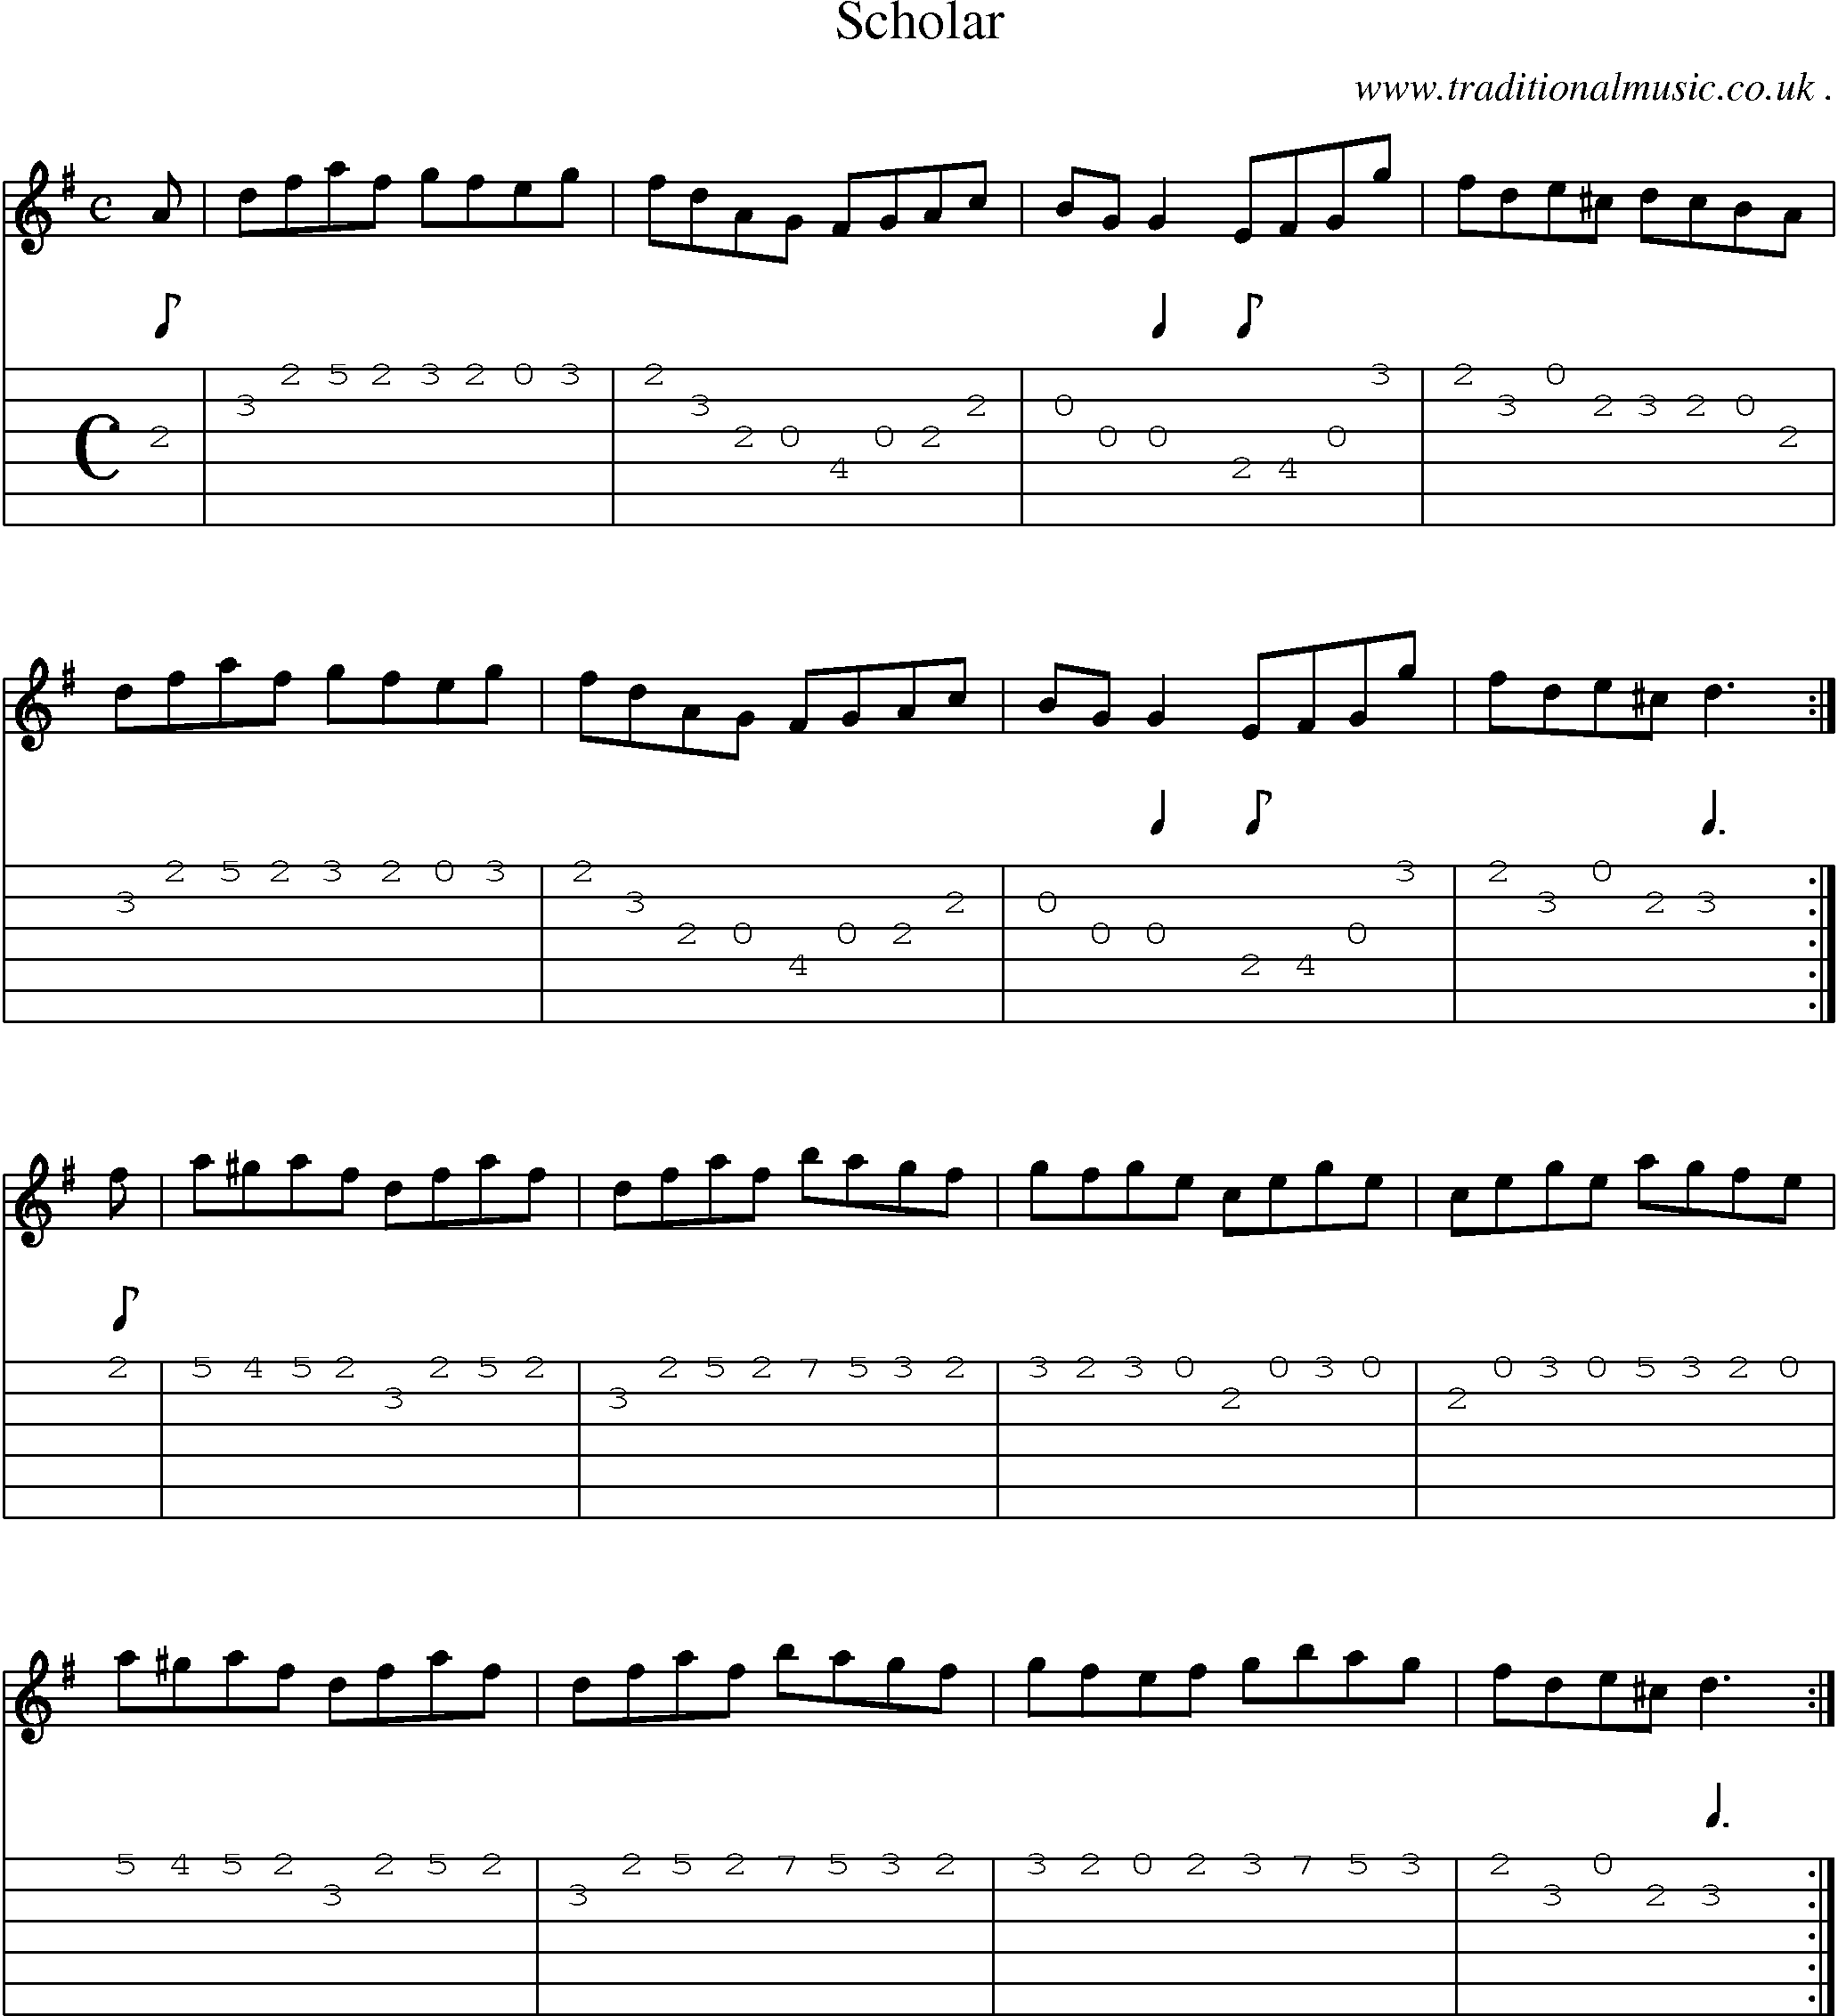 Sheet-Music and Guitar Tabs for Scholar